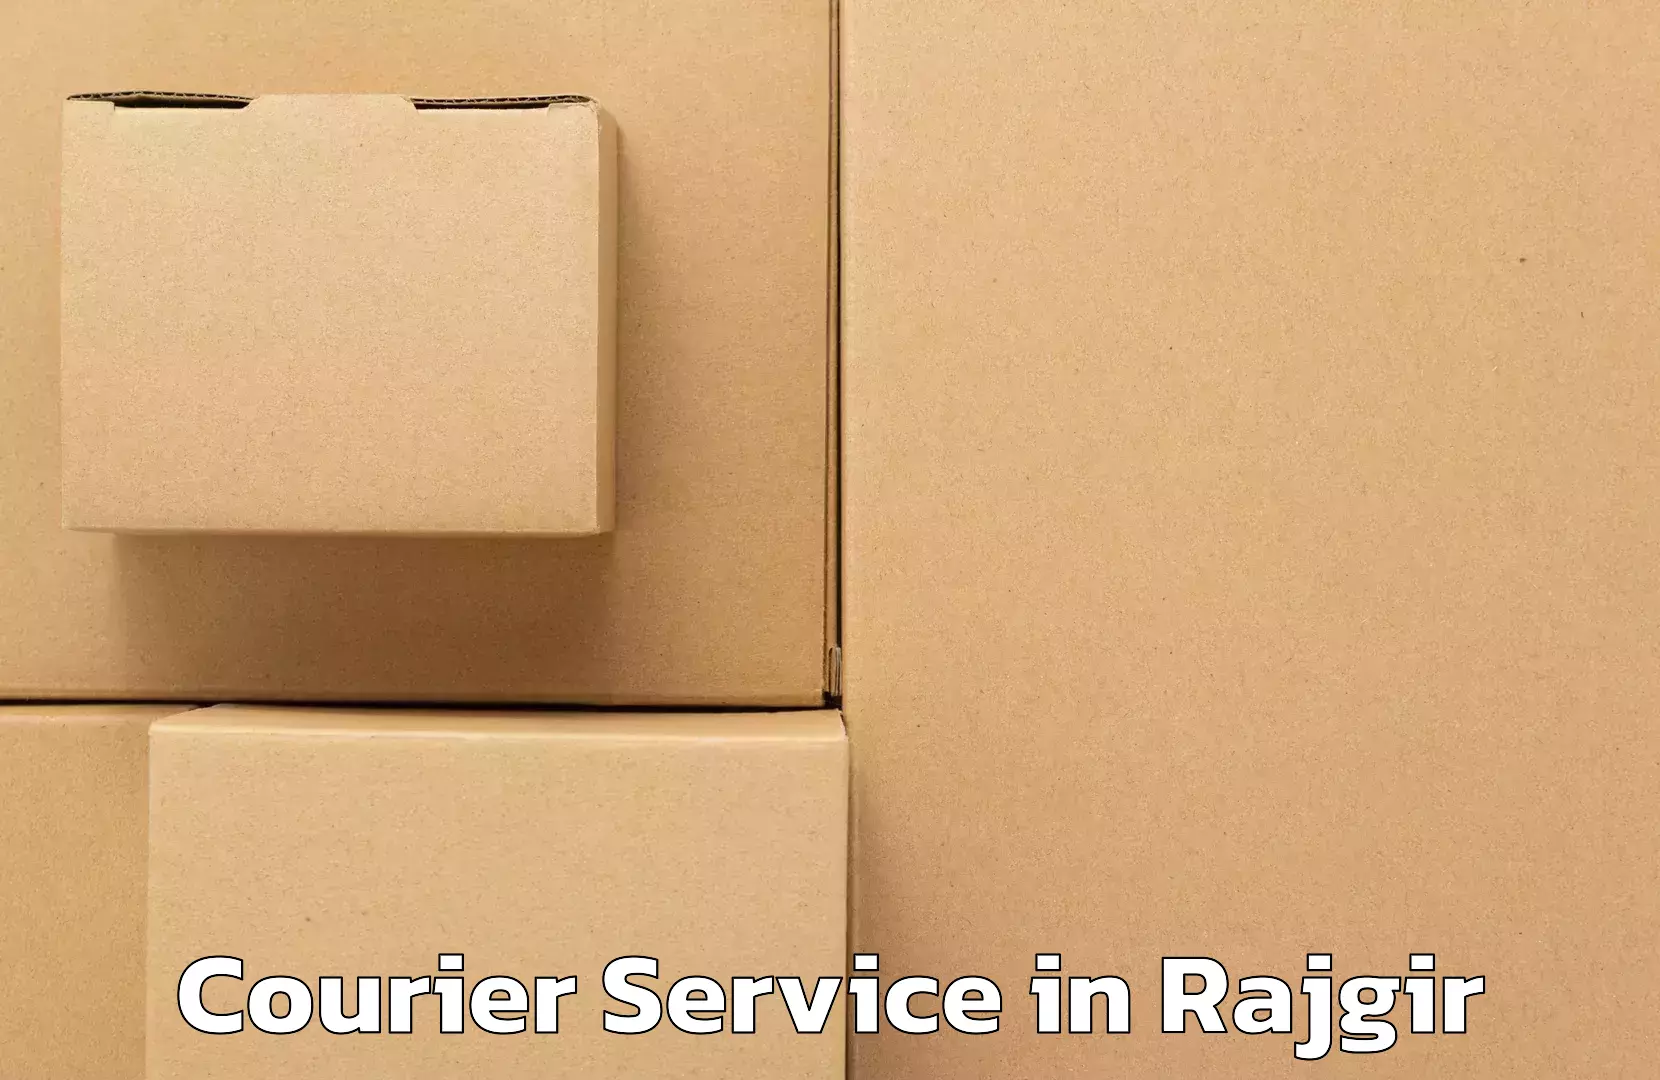 Scheduled delivery in Rajgir